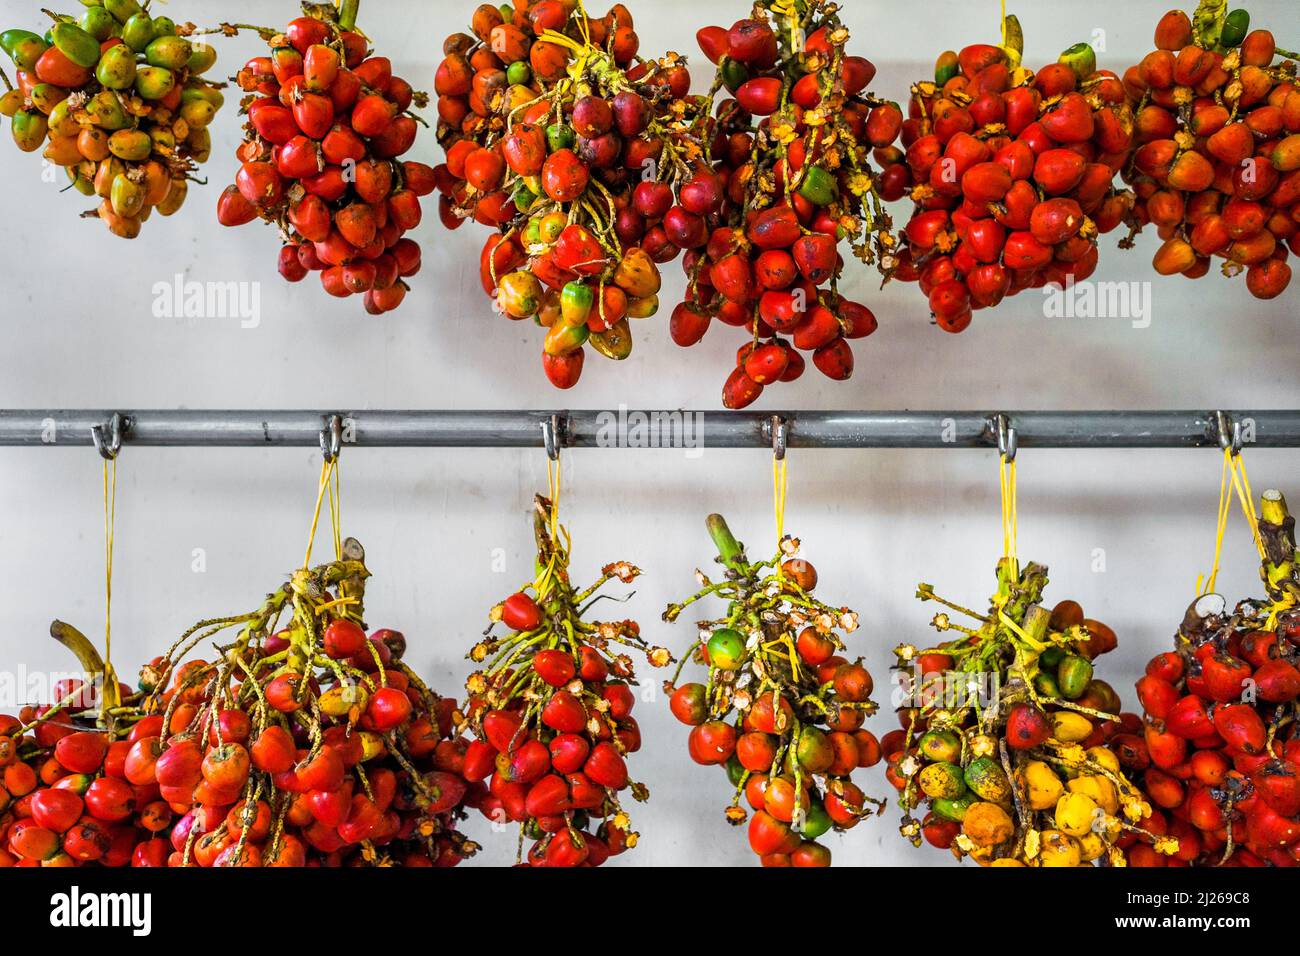 Bunches of raw chontaduro (peach palm) fruits are seen hung in a shop in Medellín, Colombia. Stock Photo